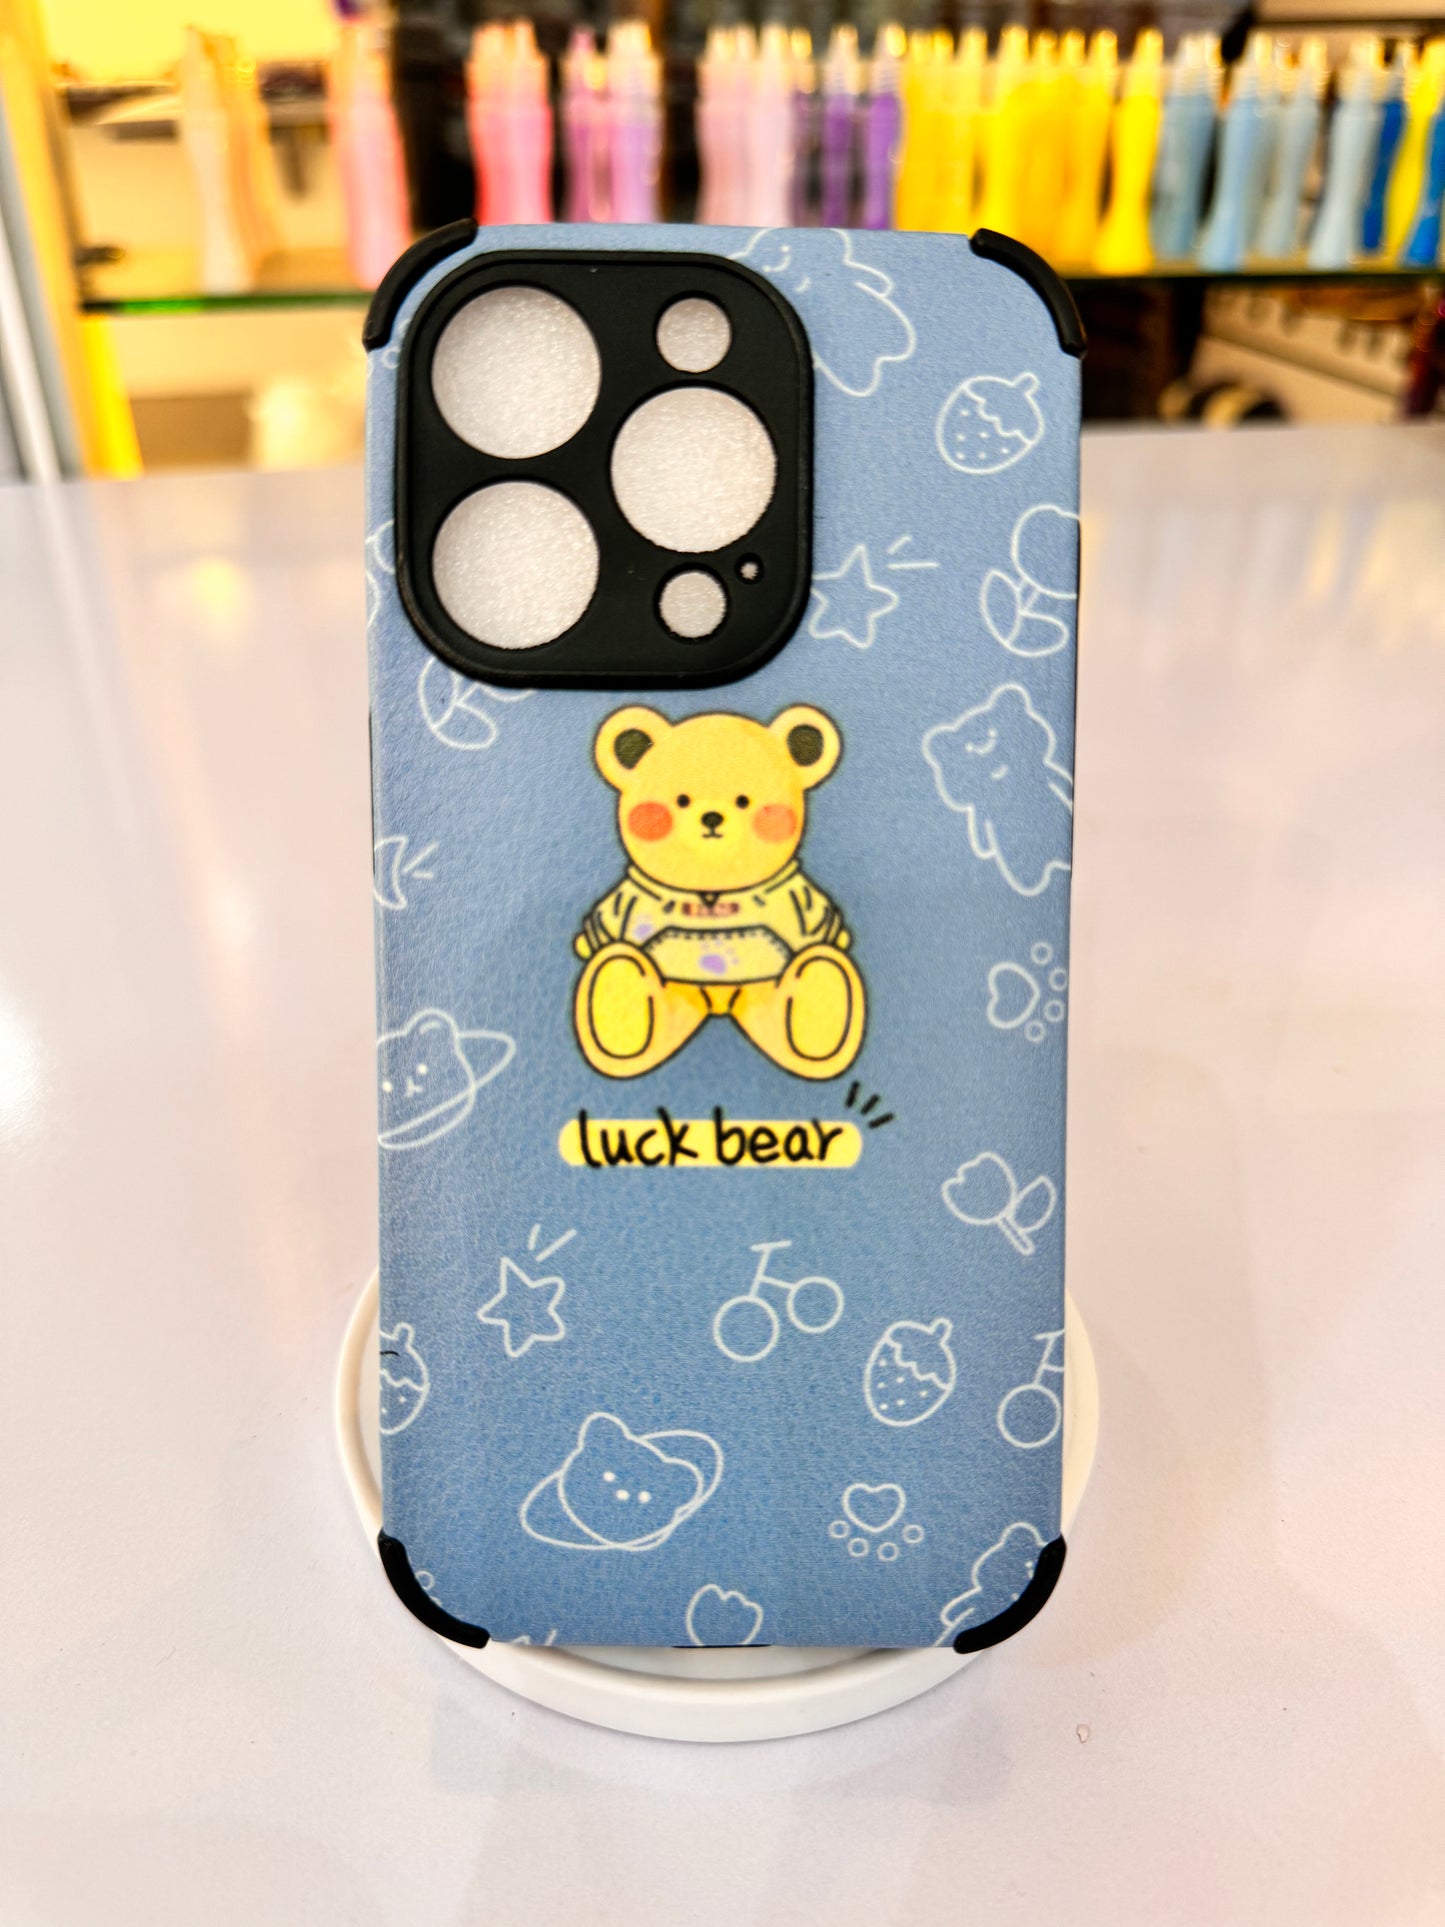 Luck bear case for iPhones